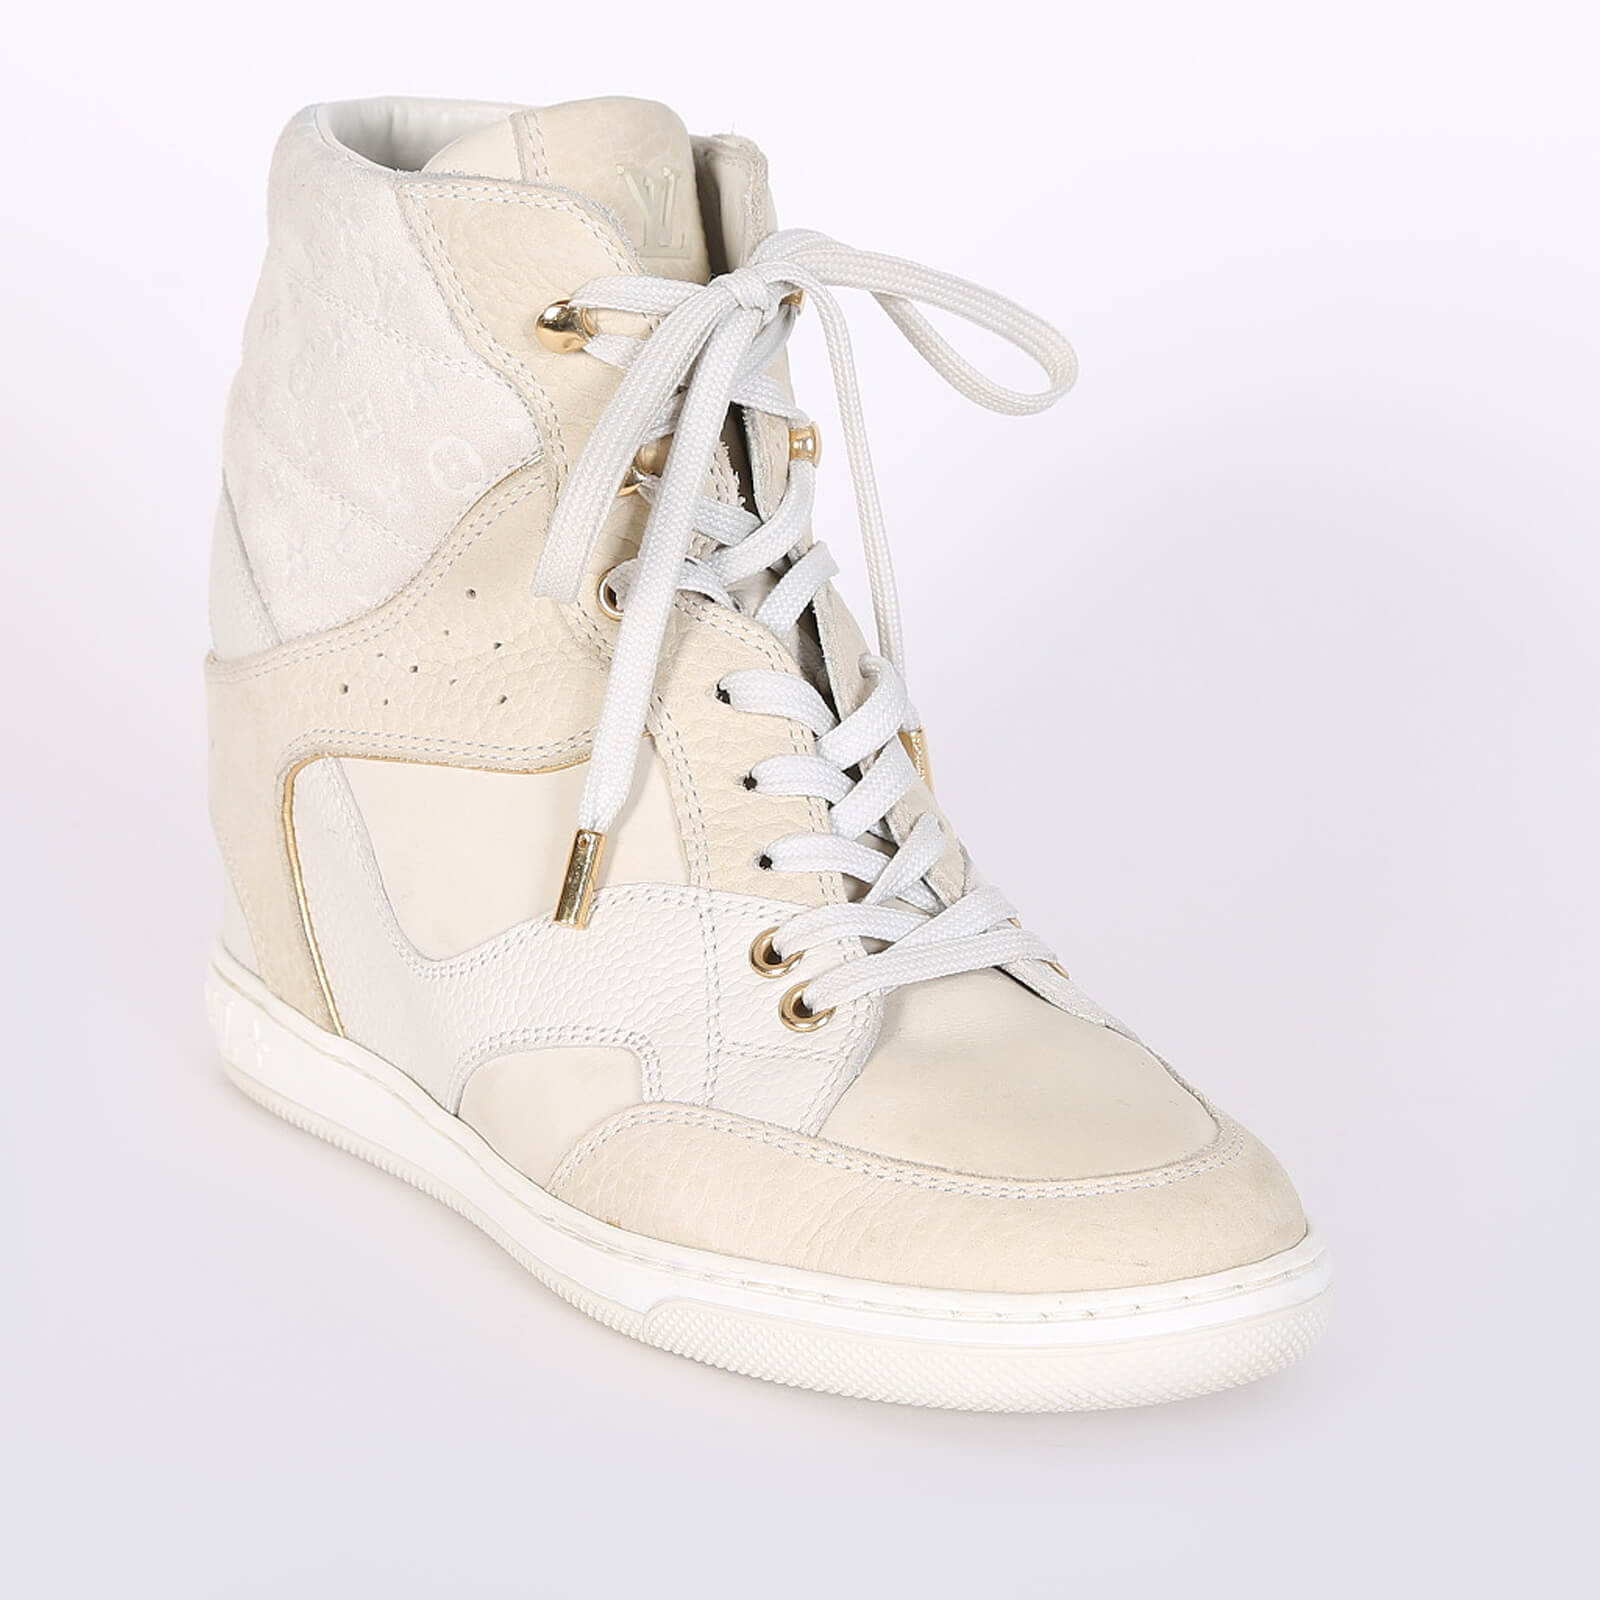 Louis Vuitton Beige Monogram Suede and Leather Cliff Top Sneaker Boots Size  38 Louis Vuitton